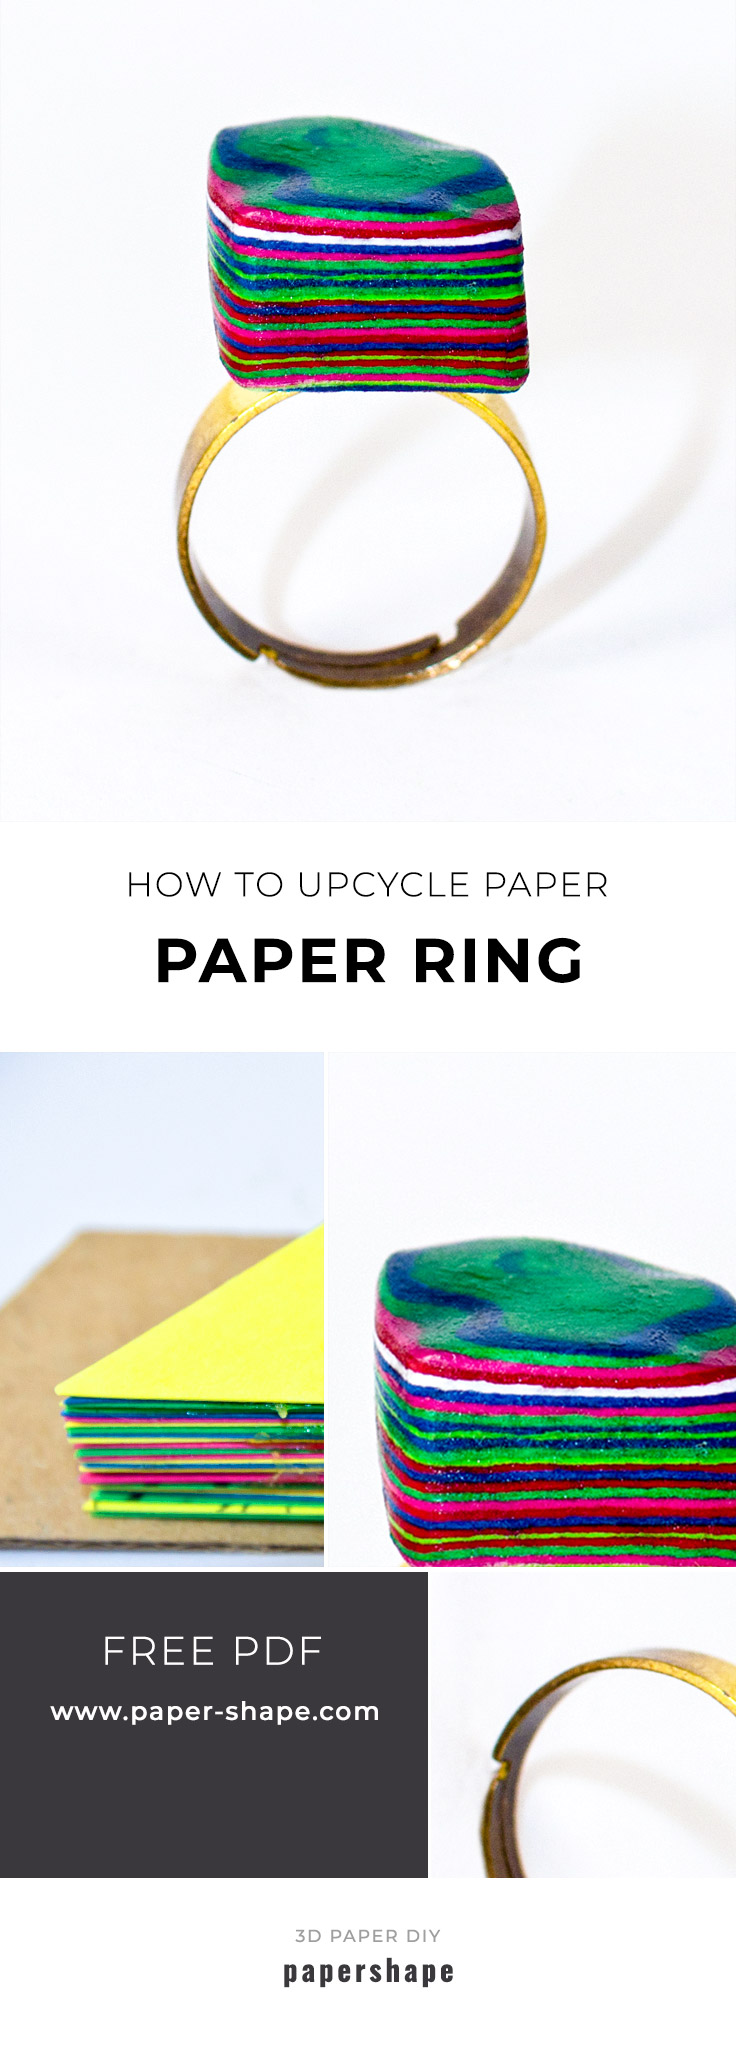 DIY Paperclip Ring : 4 Steps (with Pictures) - Instructables